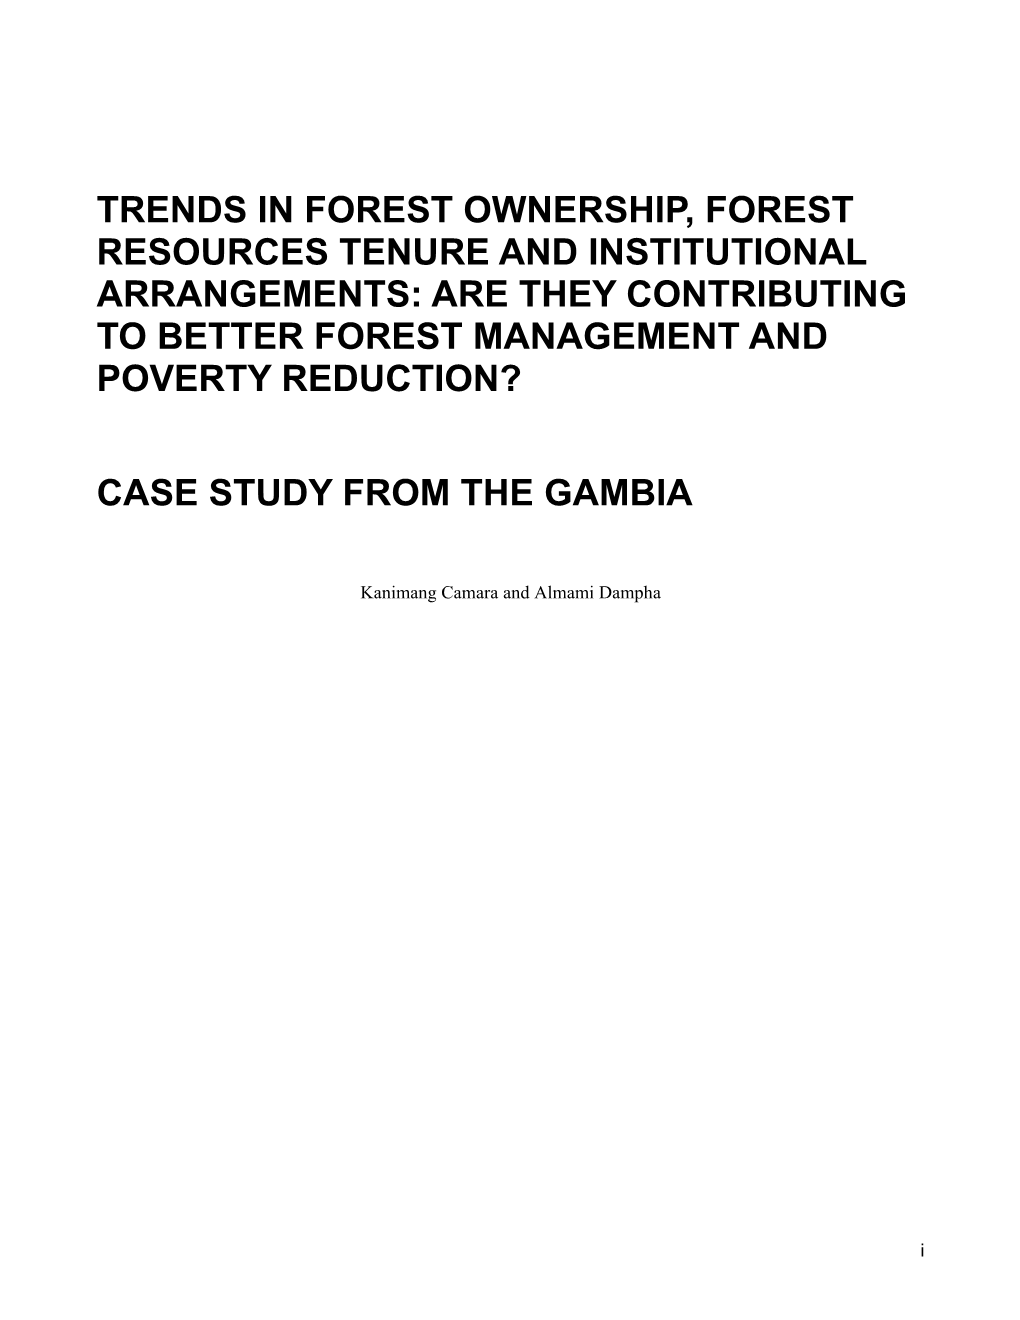 Trends in Forest Ownership, Forest Resources Tenure and Institutional Arrangements: Are They Contributing to Better Forest Management and Poverty Reduction?